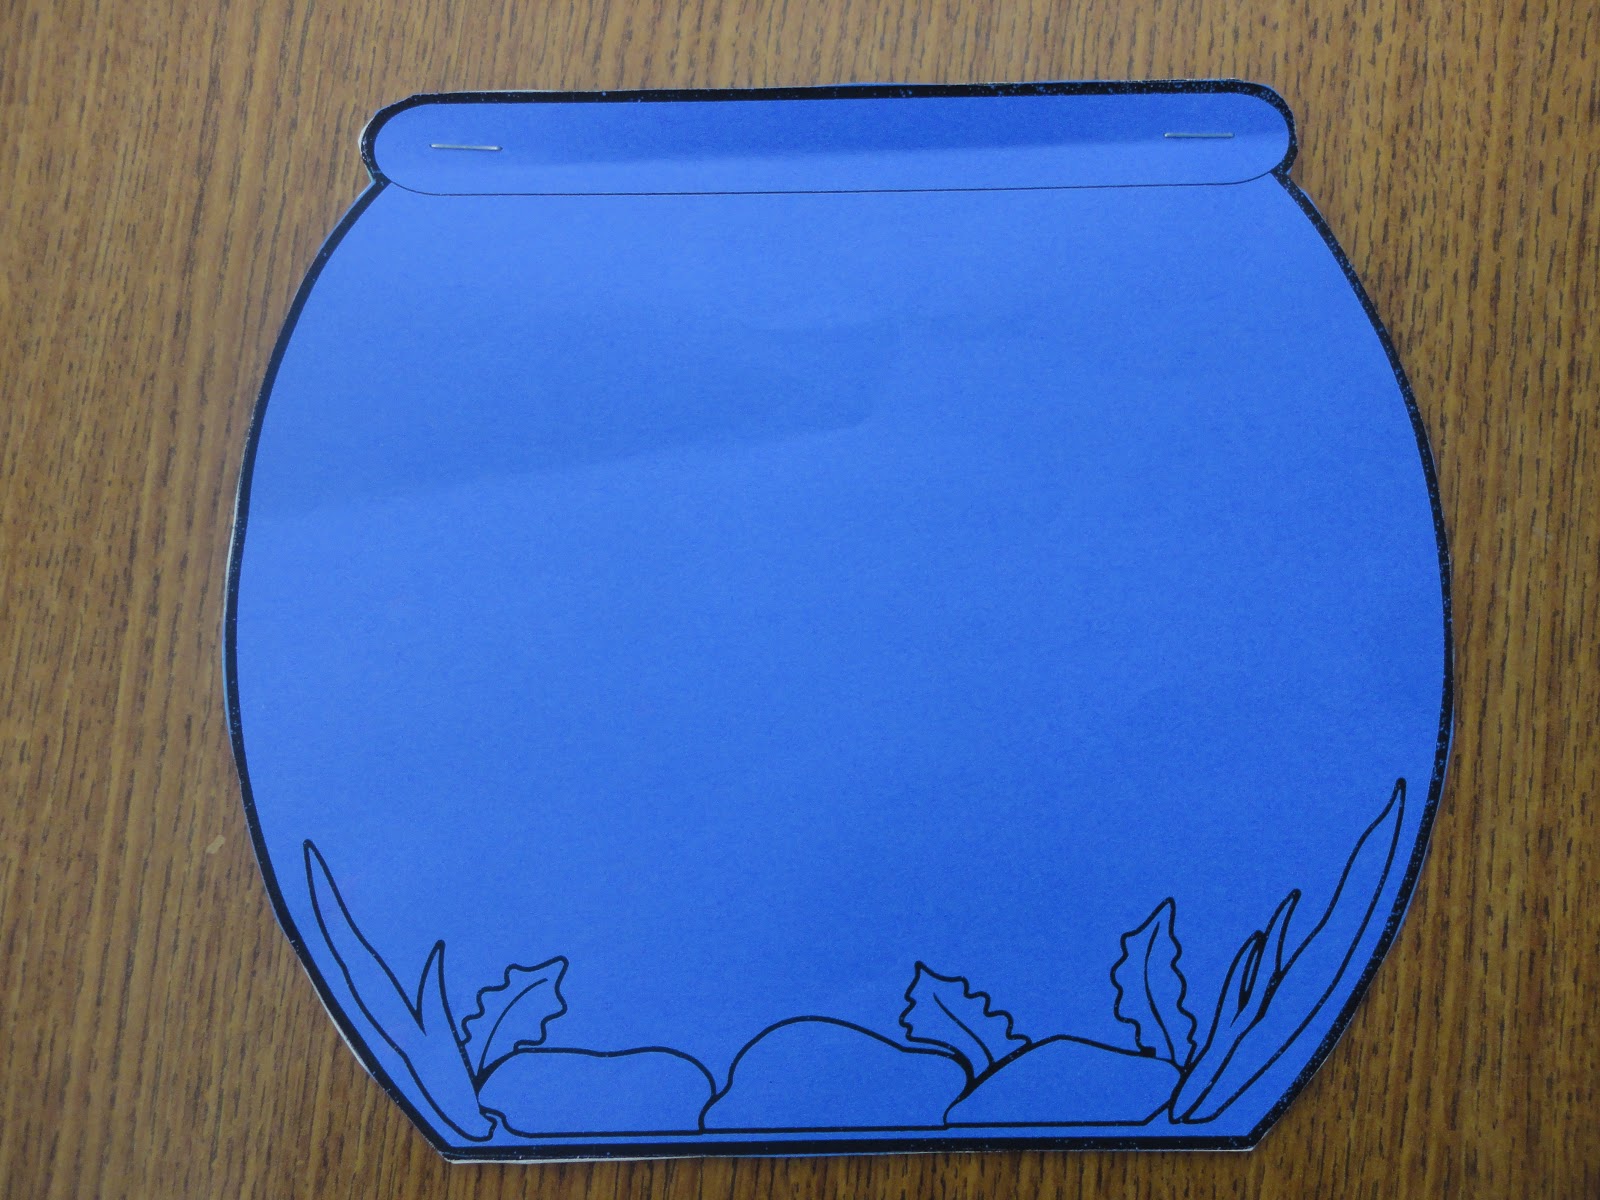 free-fish-bowl-template-download-free-fish-bowl-template-png-images